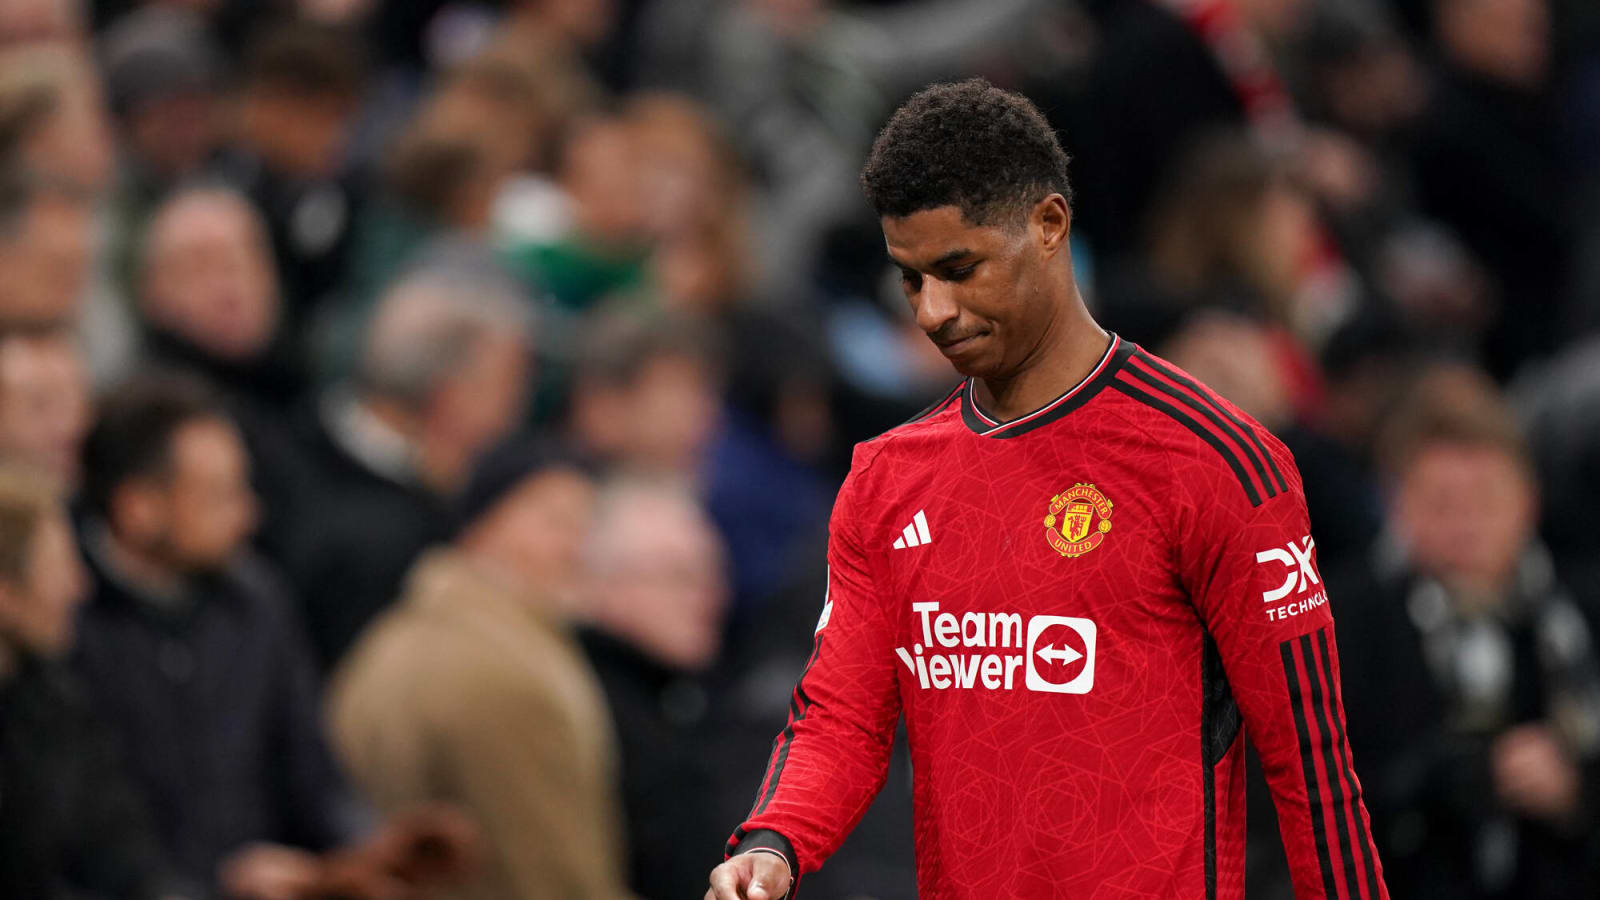 One of Man United’s most important players 'doesn’t look happy', says pundit